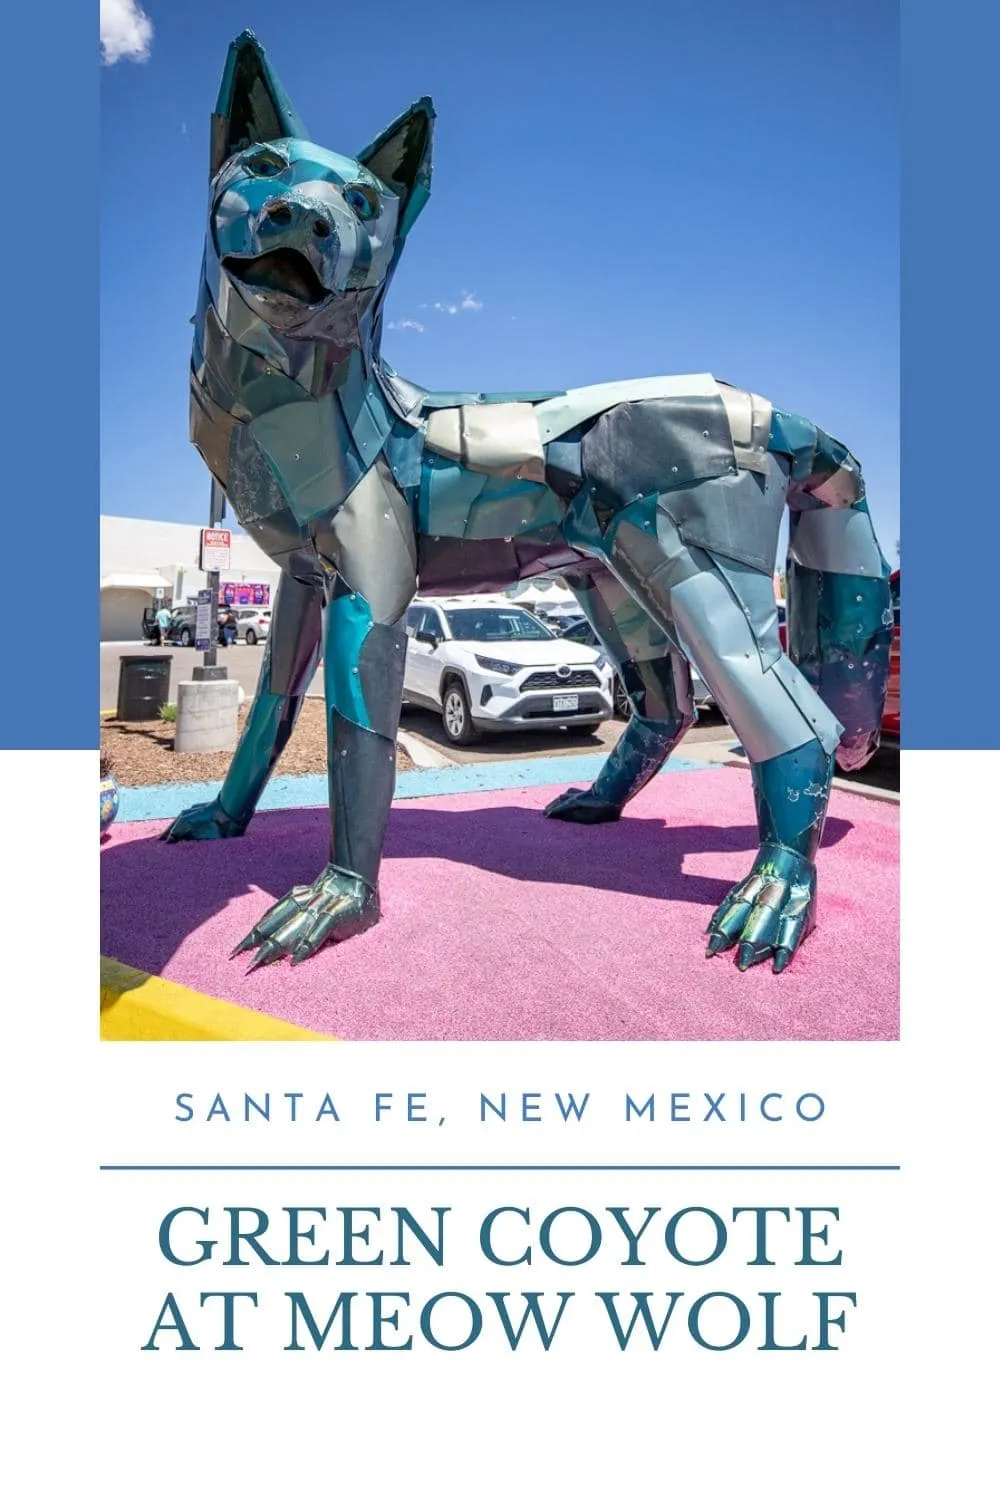 This roadside attraction is pretty wild. Find the giant Green Coyote statue in front of Meow Wolf in Santa Fe, New Mexico. The giant coyote sculpture is officially titled "Green Coyote" and was created by artist Don Kennell. It was originally, temporarily, erected at Railyard Park’s picnic circle in Santa Fe before finding a permanent home outside of Meow Wolf’s House of Eternal Return in Santa Fe, New Mexico. #MeowWolf #RoadsideAttraction #RoadsideAttractions #NewMexicoRoadsideAttraction